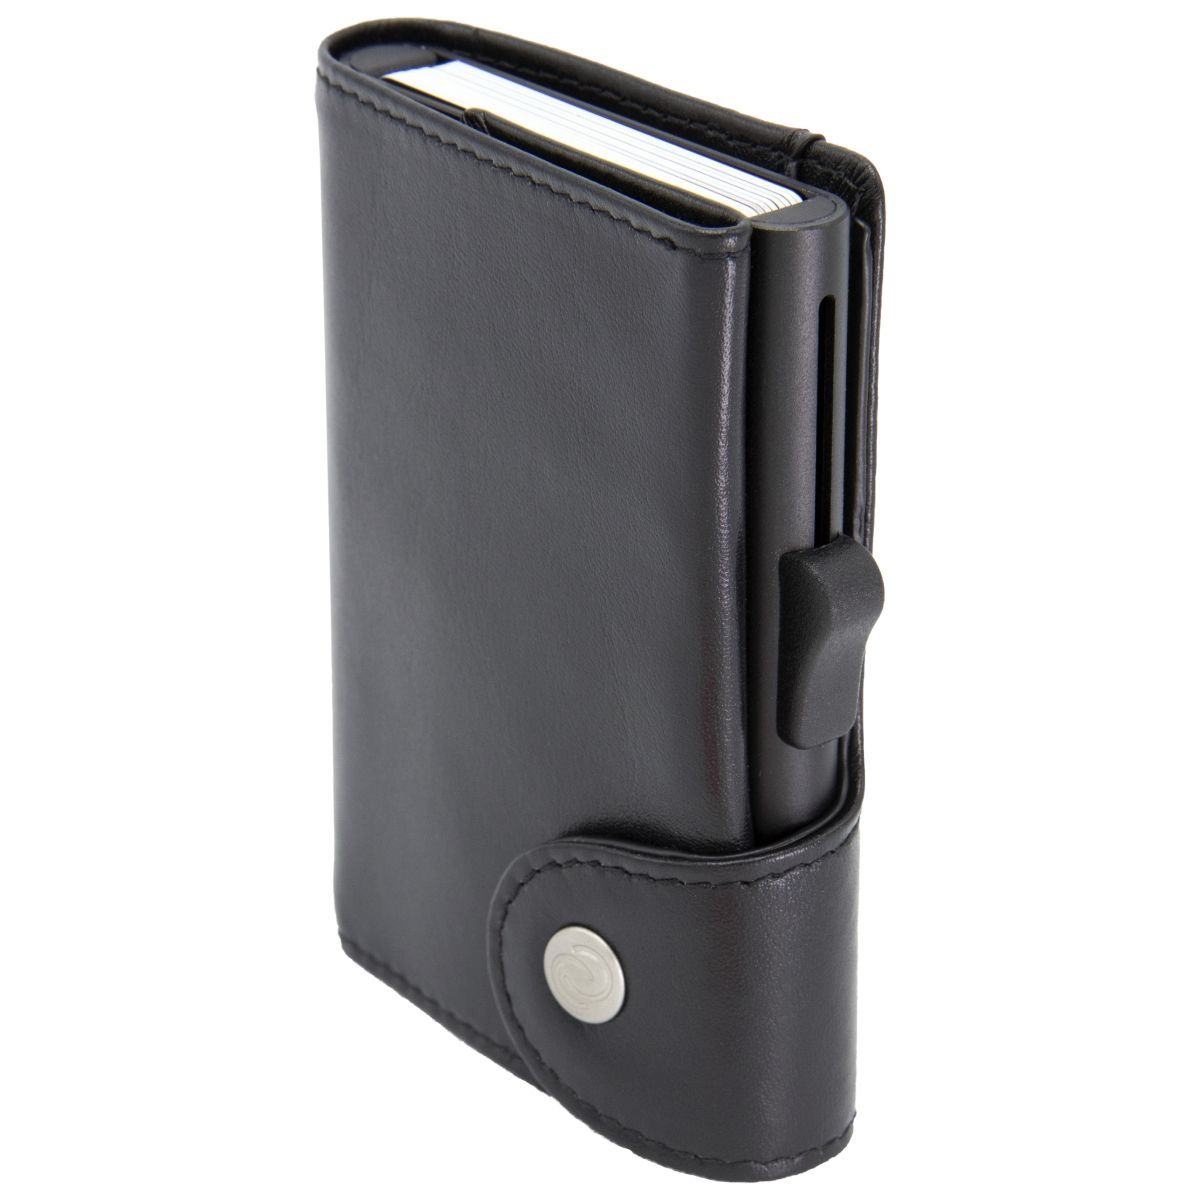 C-Secure XL Aluminum Card Holder with PU Leather - Black